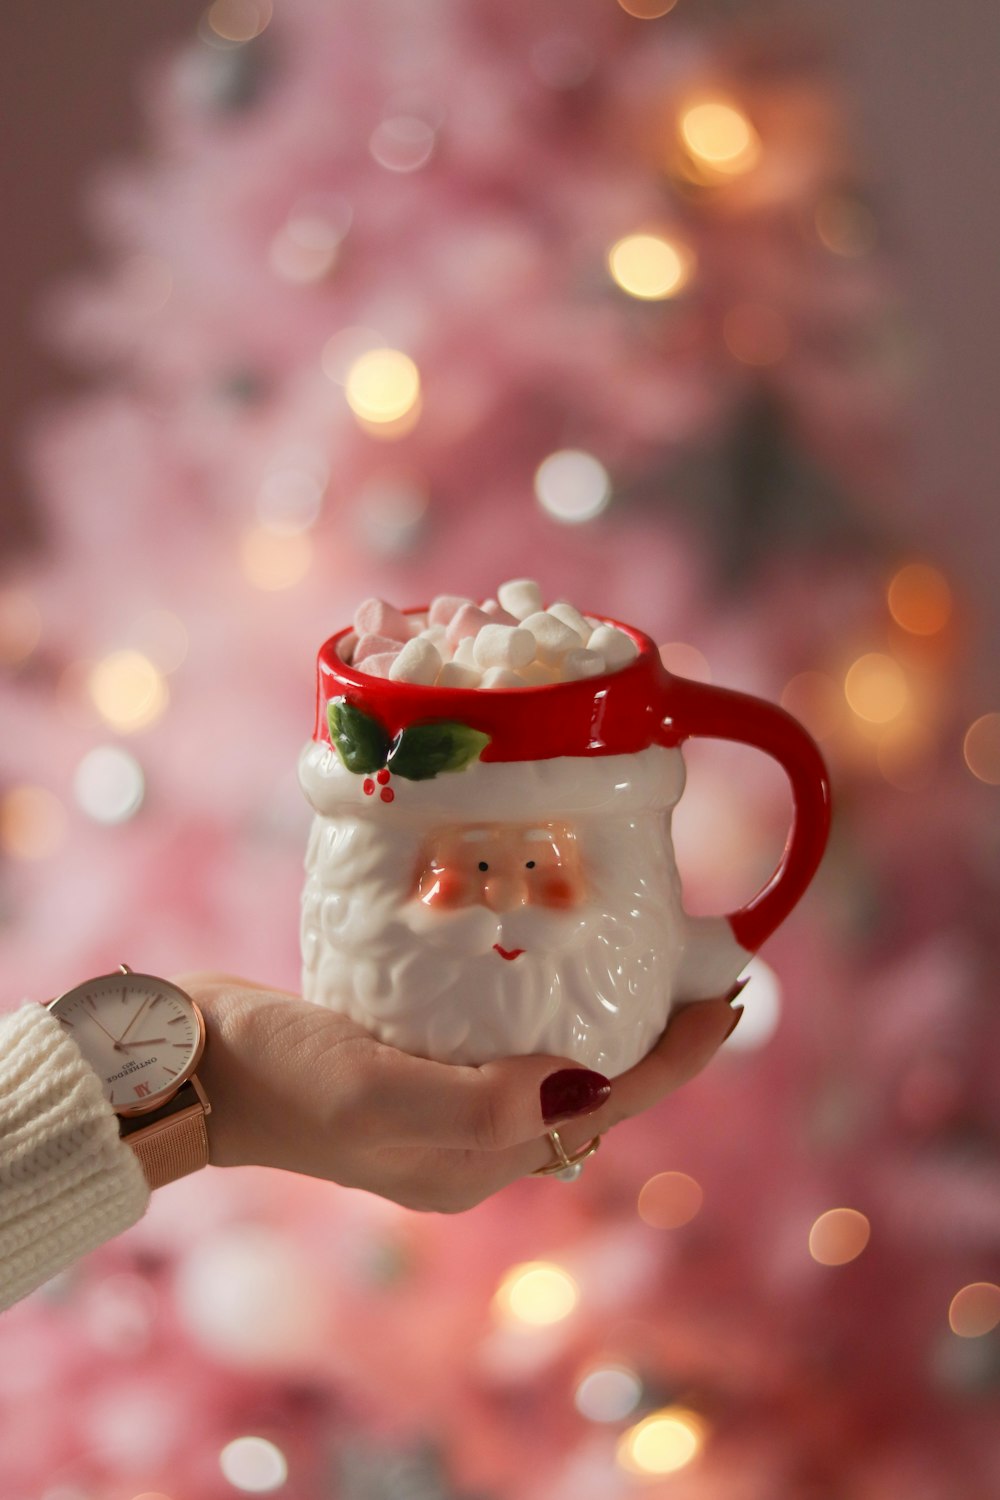 a person holding a coffee mug in front of a christmas tree